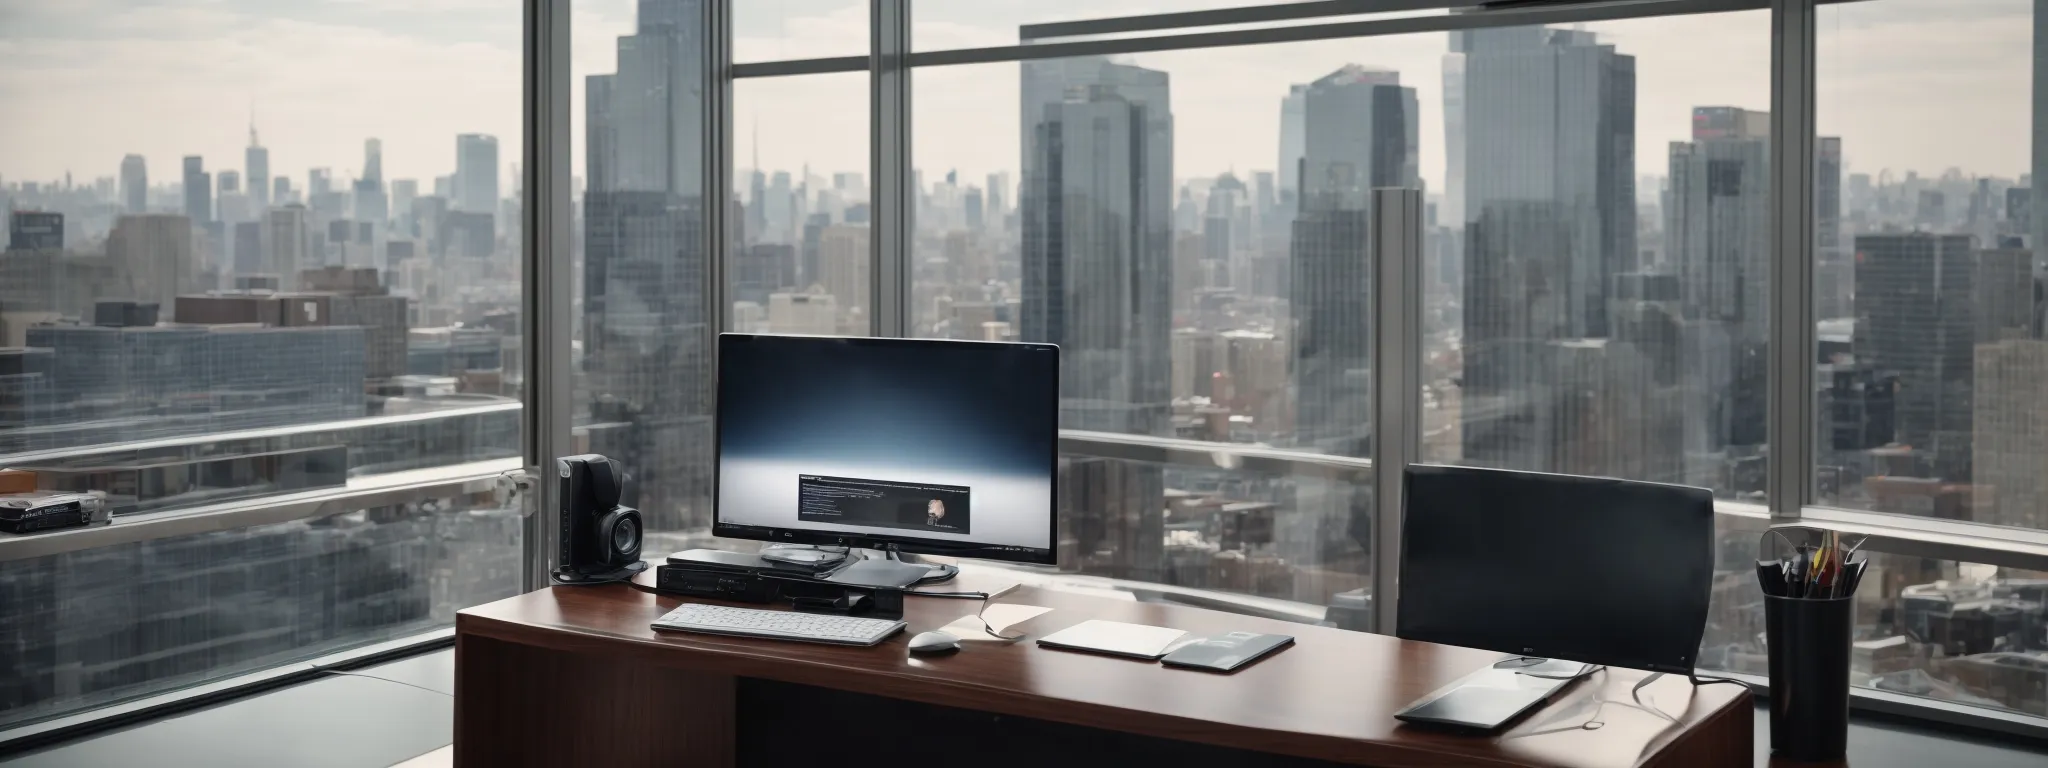 a polished executive desk with a computer displaying a website homepage in a modern office overlooking a bustling city skyline.